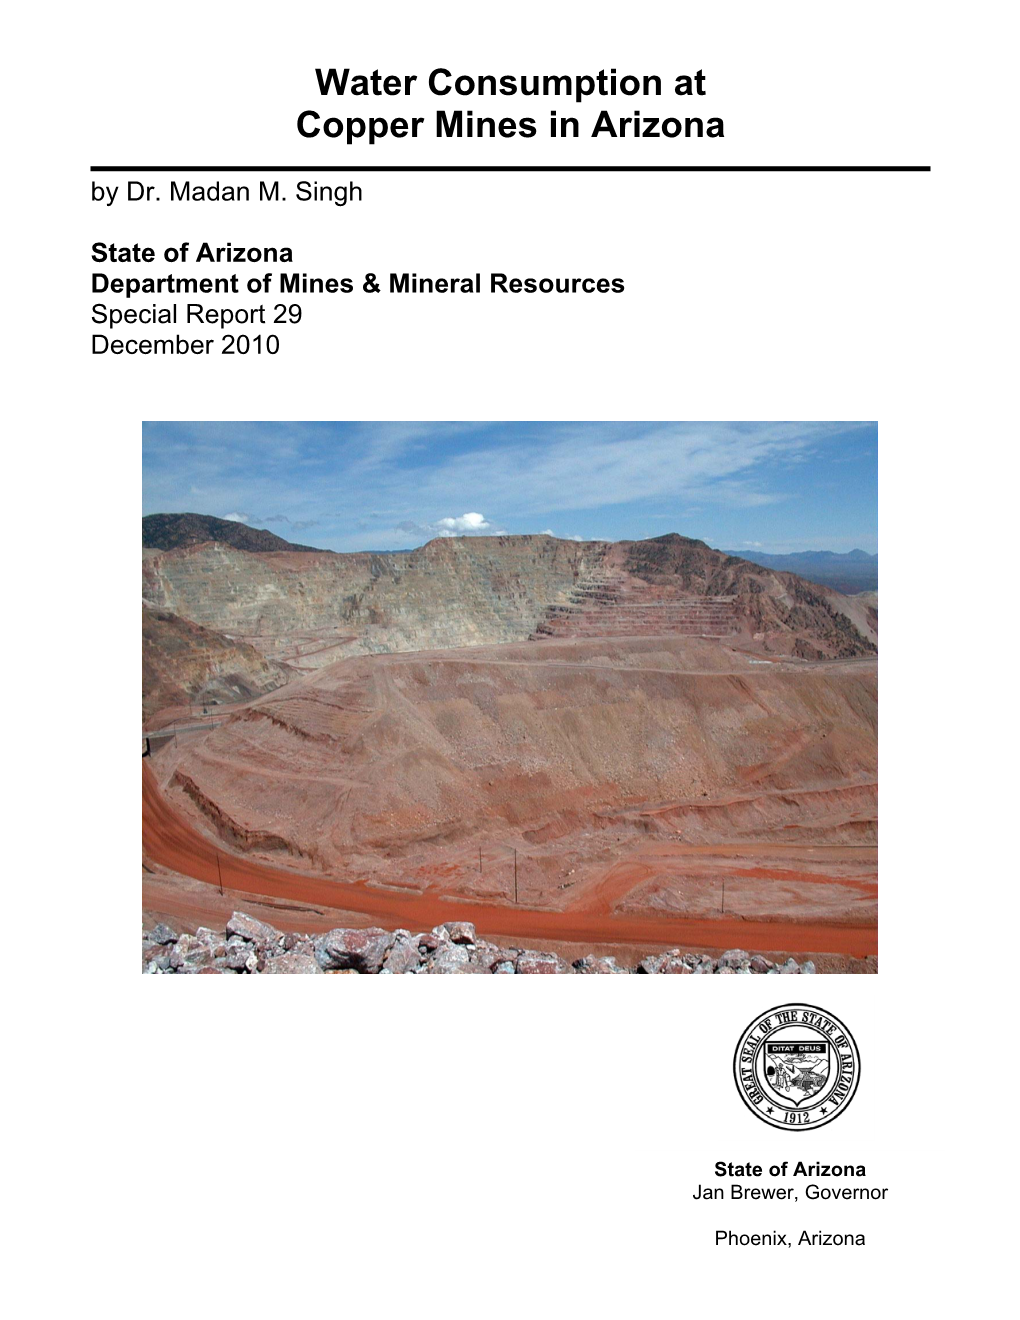 Water Consumption at Copper Mines in Arizona by Dr